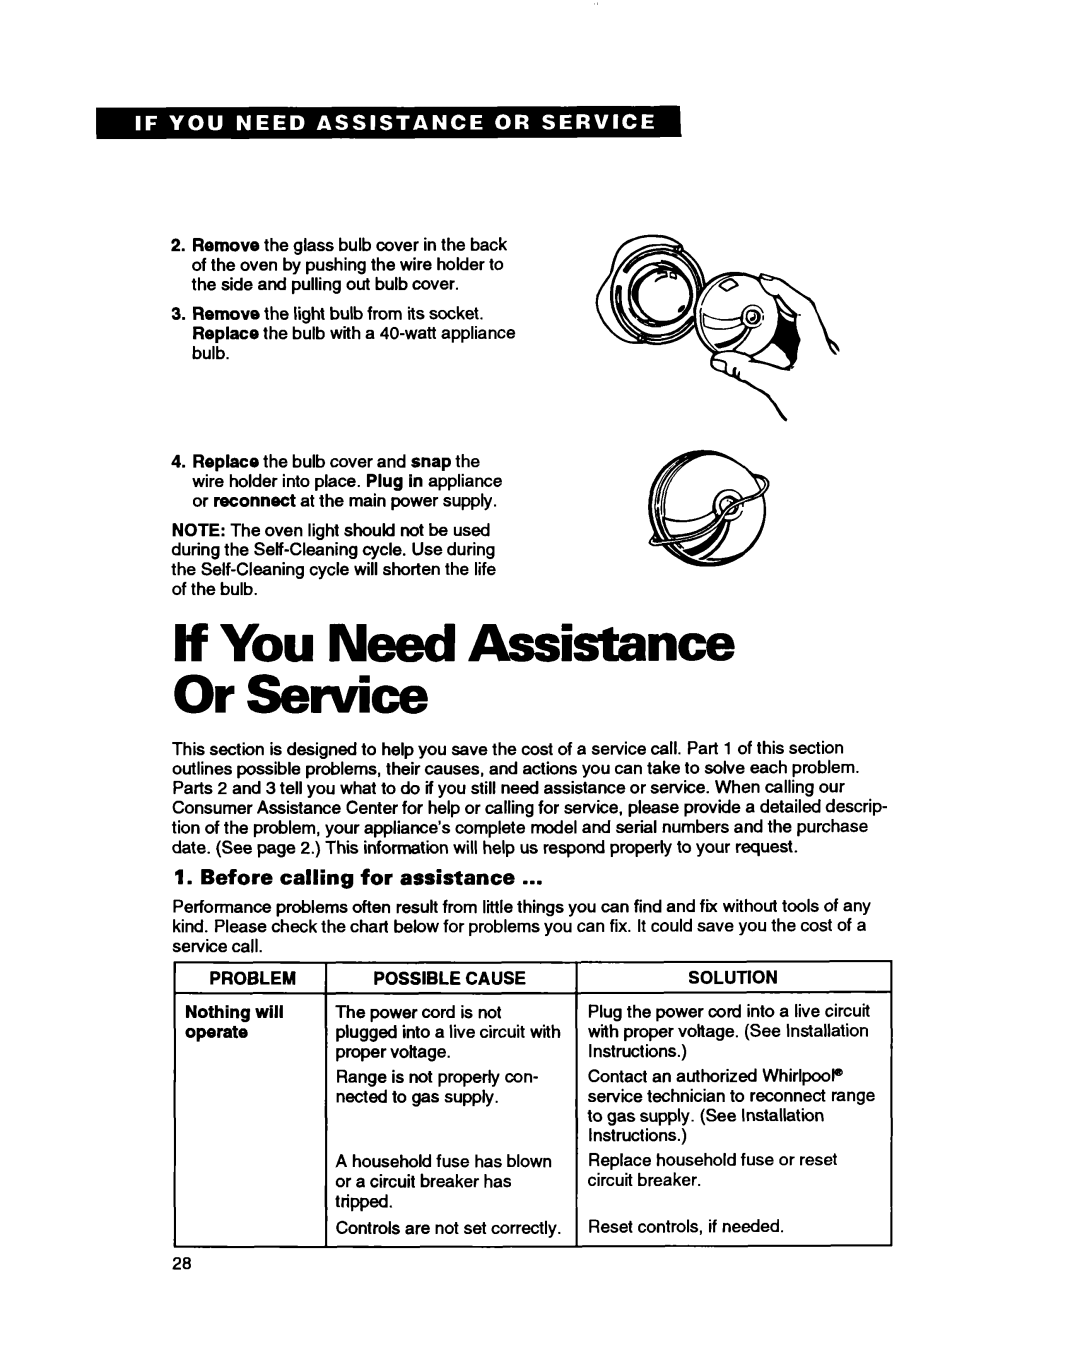 Whirlpool TGR88W2B manual If You Need Assistance Or Service, Before calling for assistance 